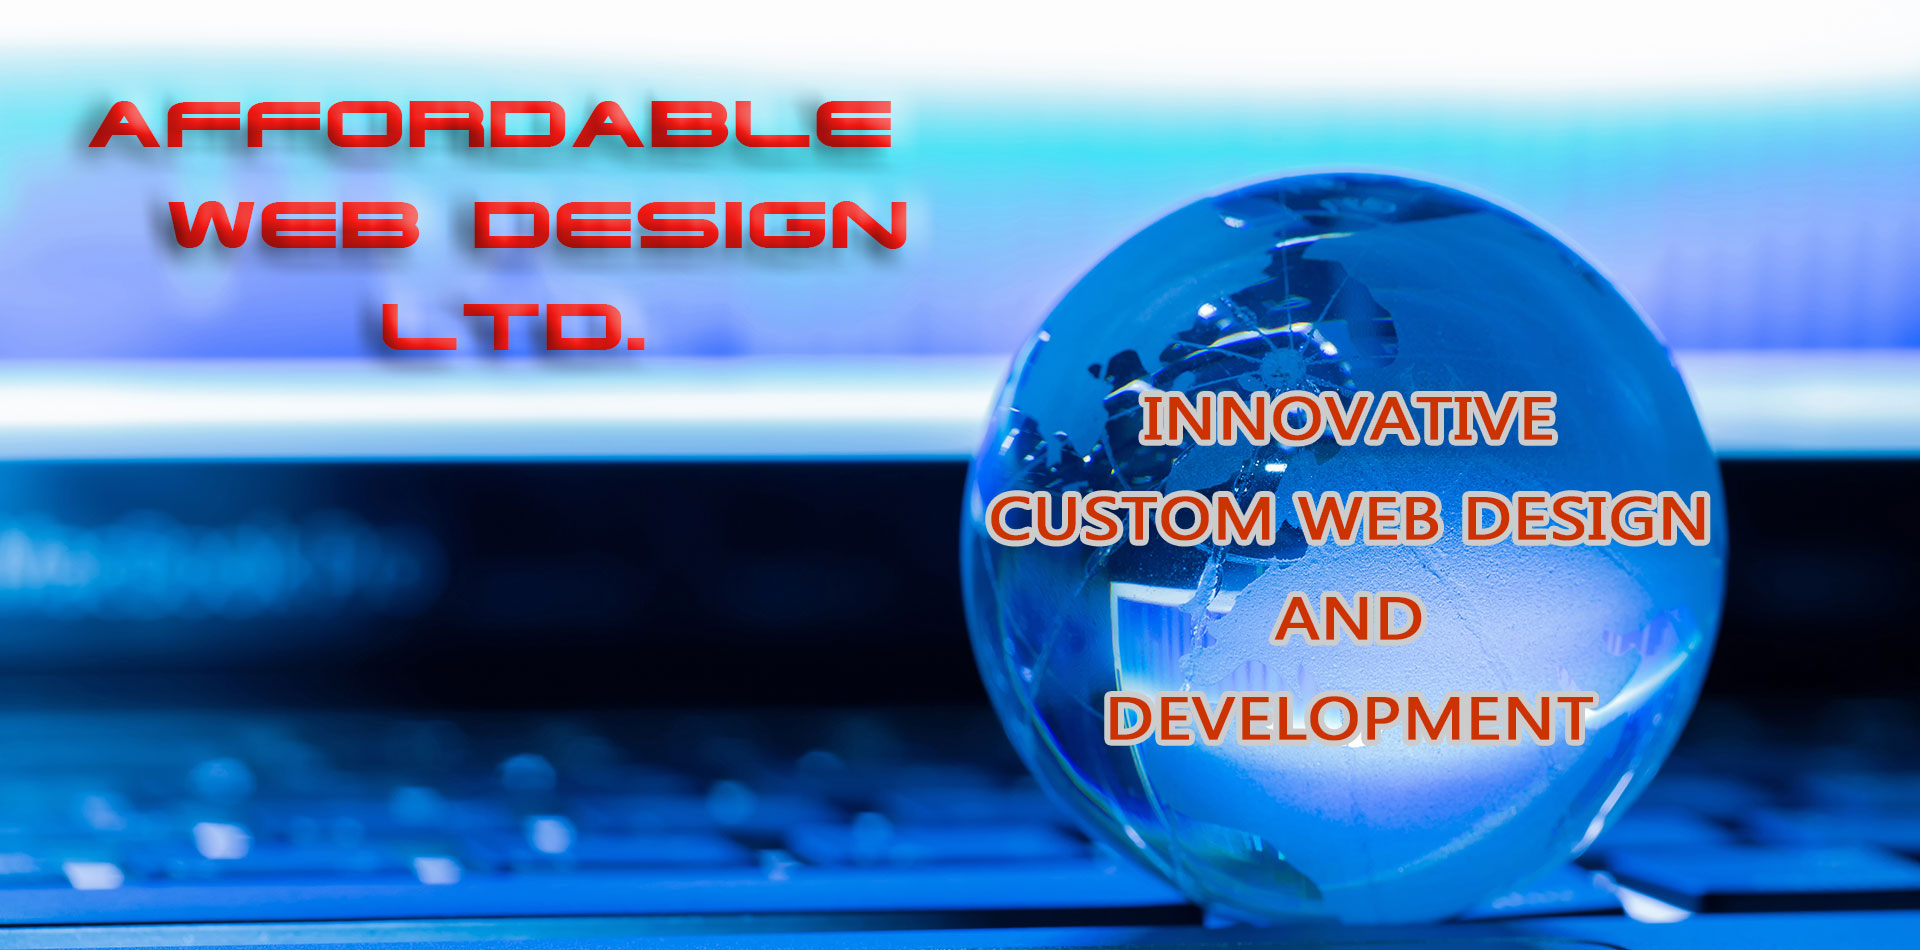 Affordable Web Design Ltd has been offering professional web design and development services throughout Canada for almost 30 years.